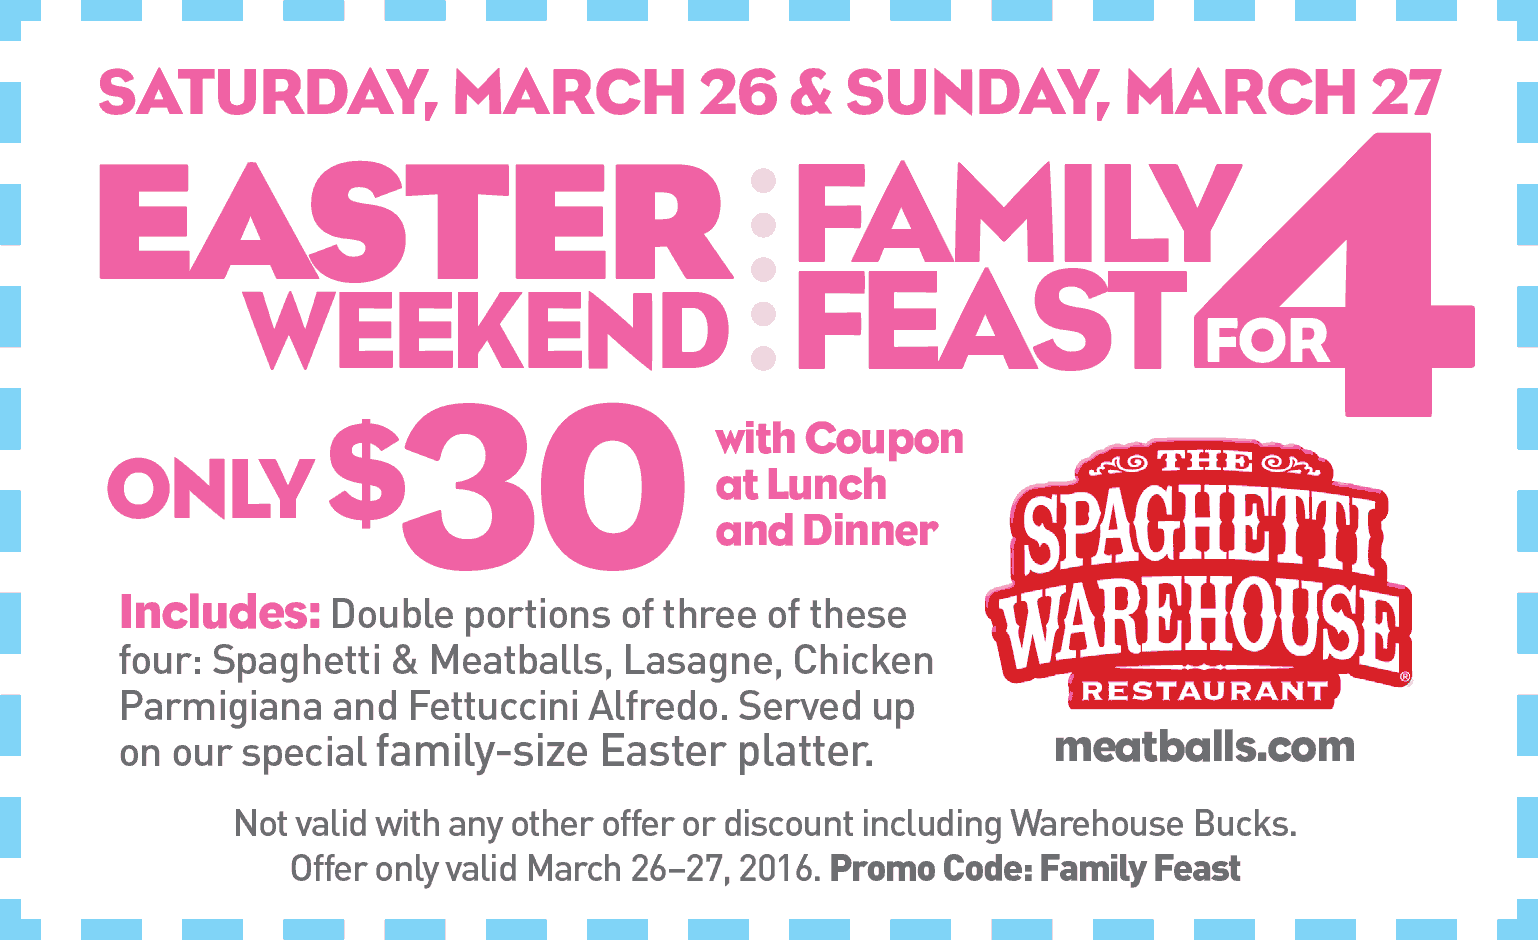 Spaghetti Warehouse Coupon April 2024 Family feast for 4 = $30 this weekend at Spaghetti Warehouse